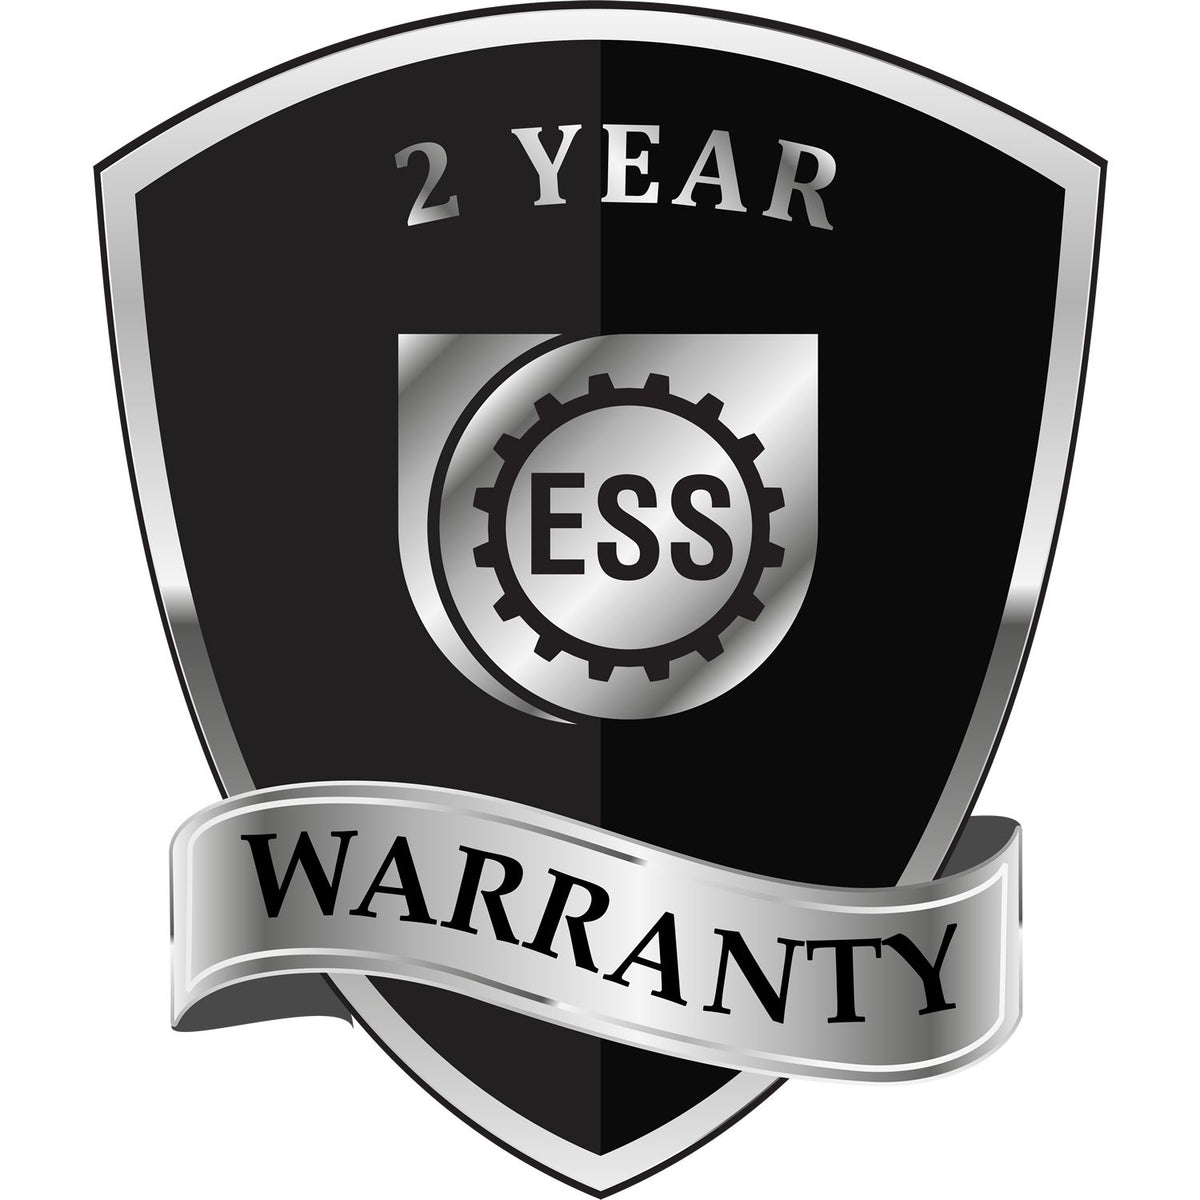 A badge or emblem showing a warranty icon for the Extended Long Reach Georgia Architect Seal Embosser